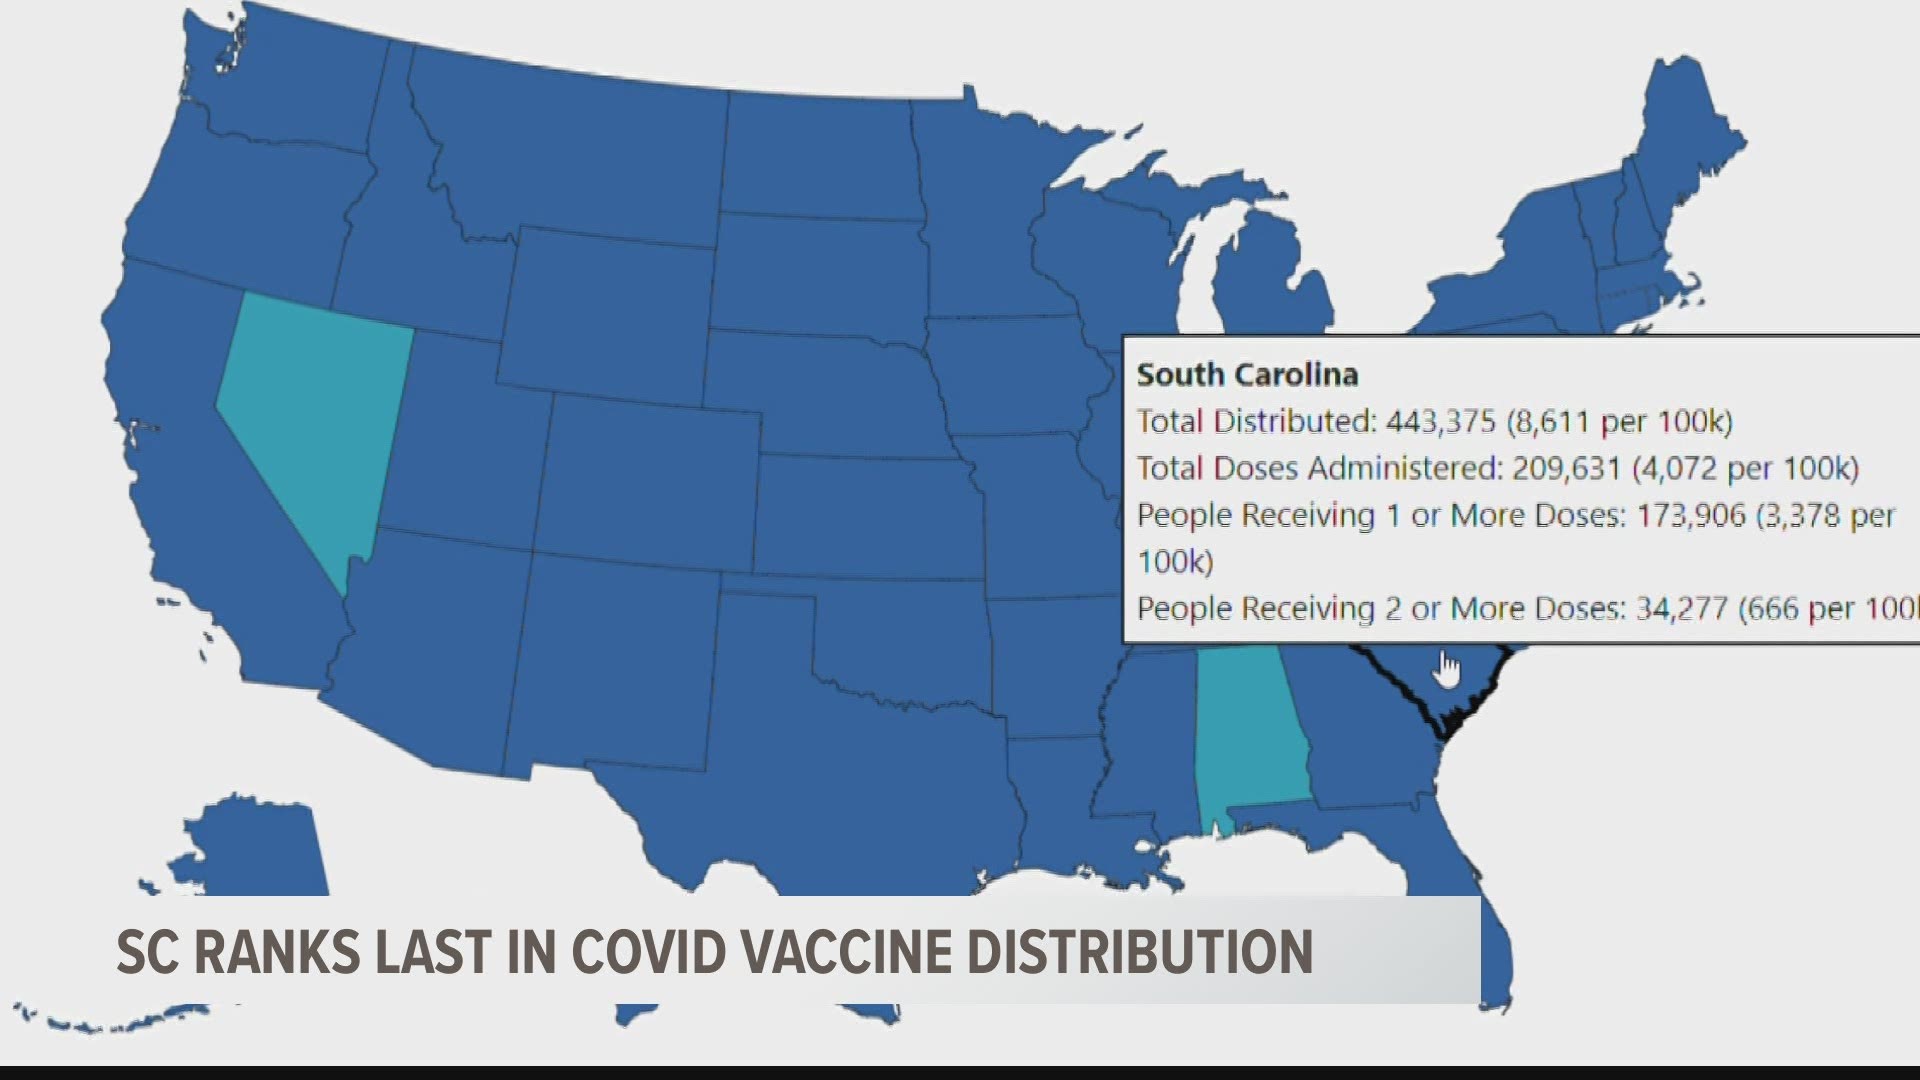 South Carolina has received 8,611 vaccines per 100,000 people. The state also has the third-lowest rates of vaccines administered.